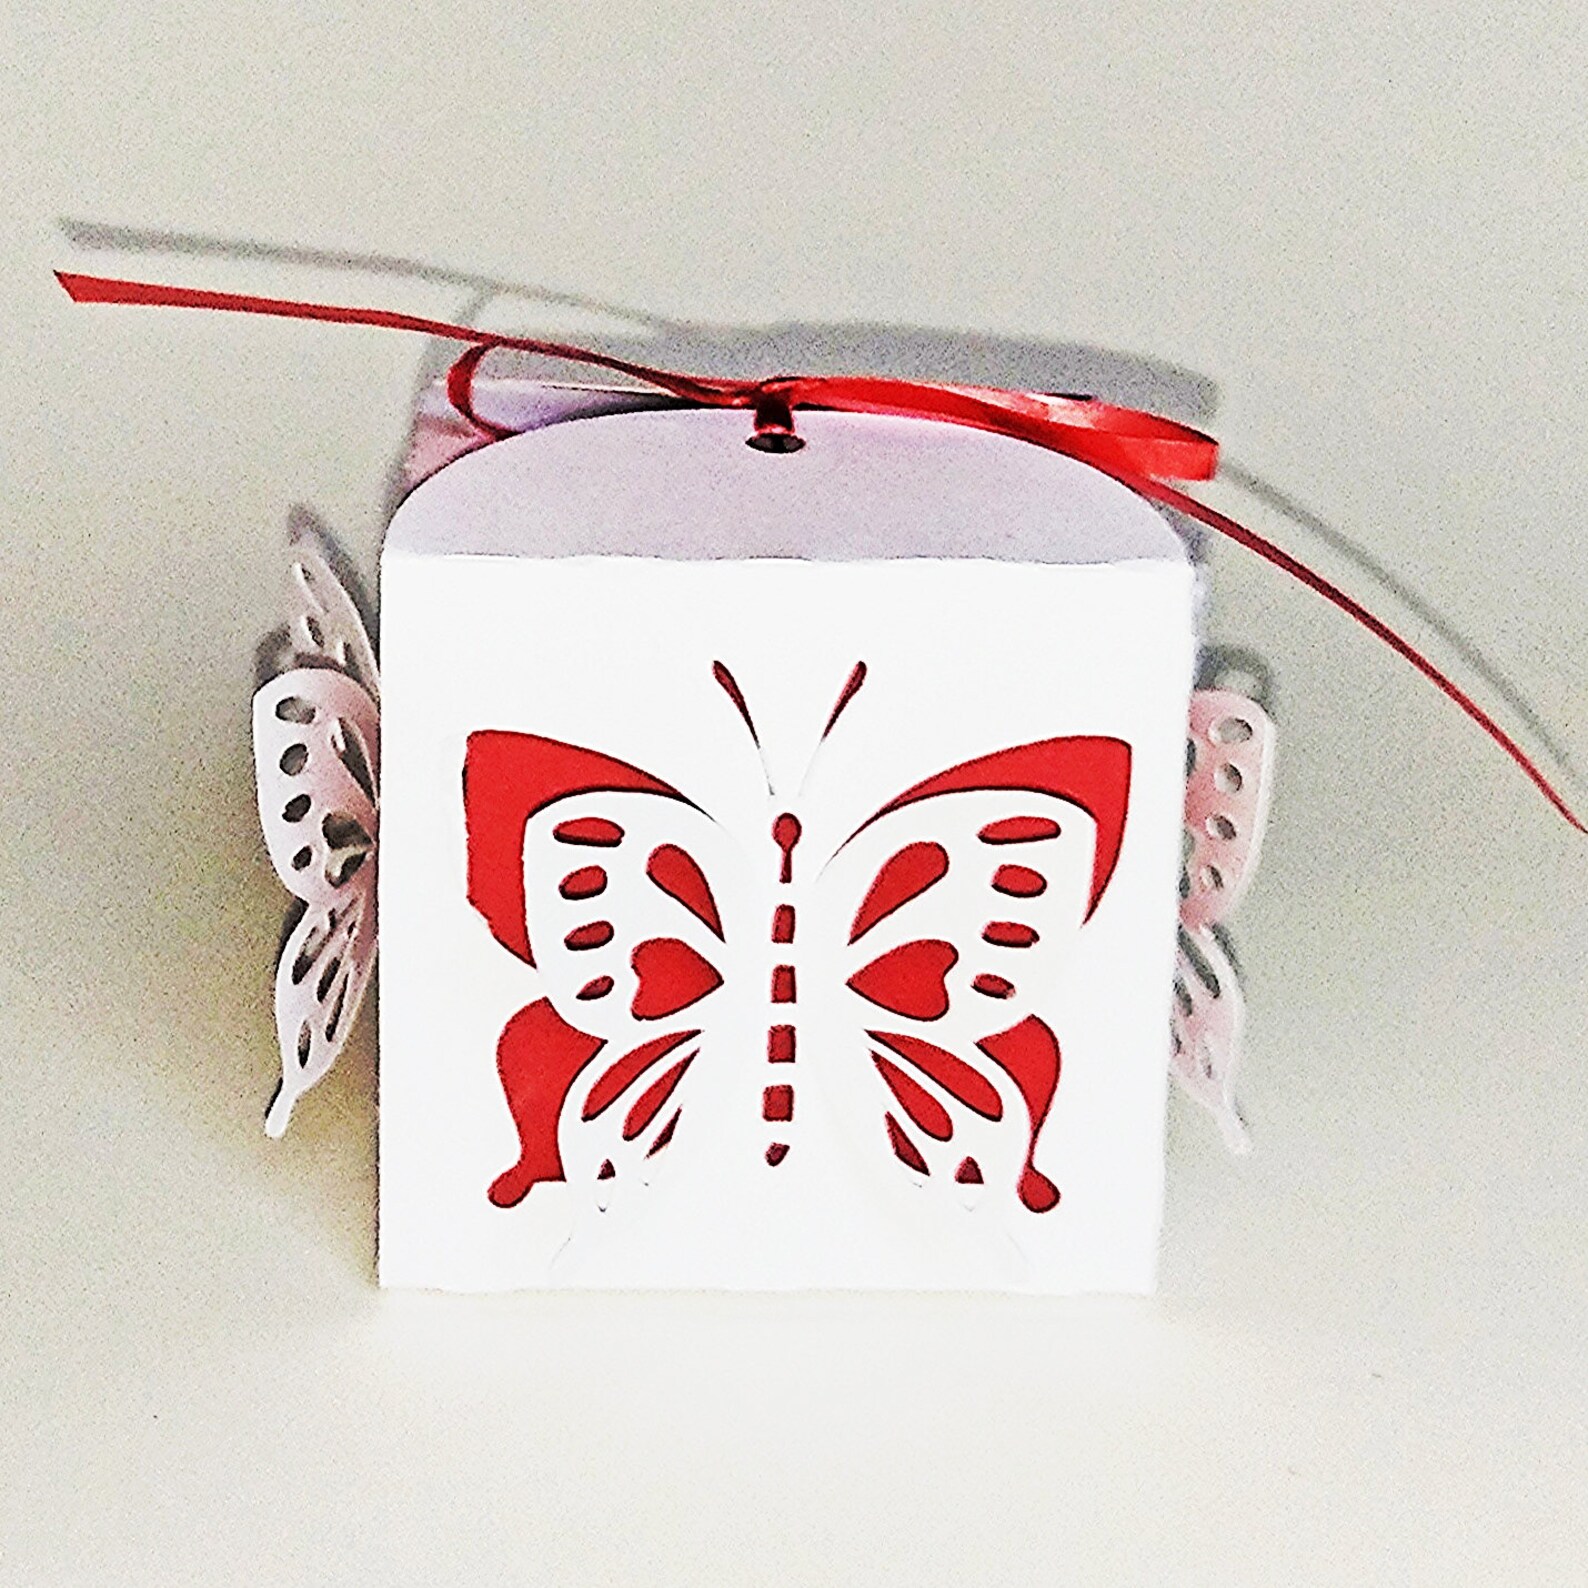 3D BUTTERFLY BOX. SVG Templates. Favor Box. Candy Box. Dxf - Etsy